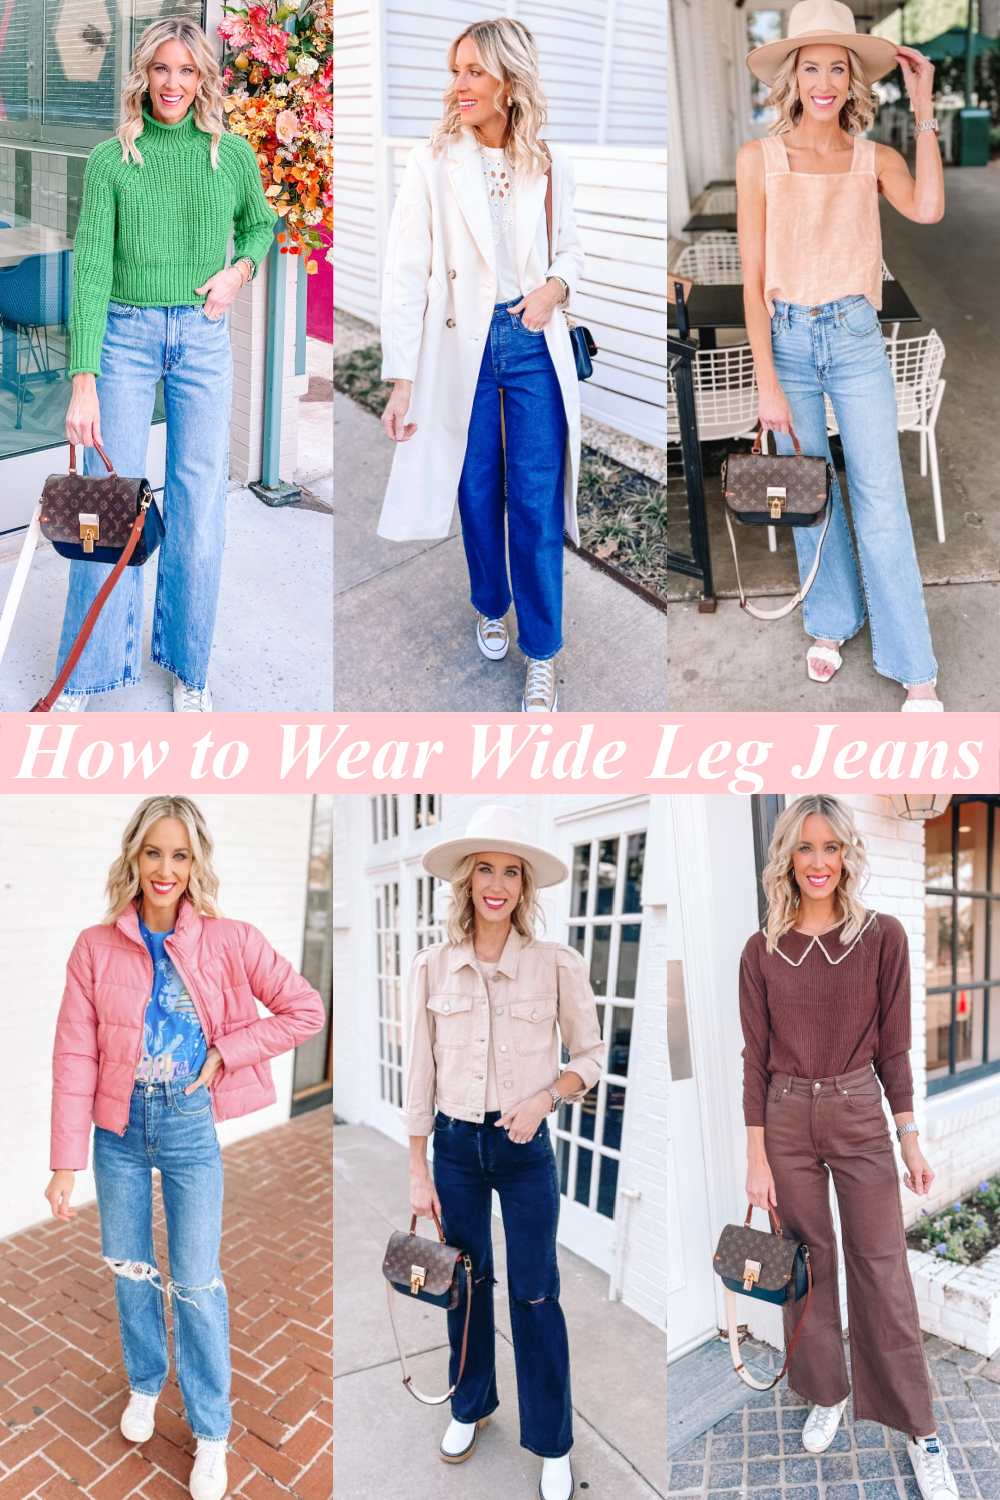 Follow these 5 tips to wear loose pants and look stylish